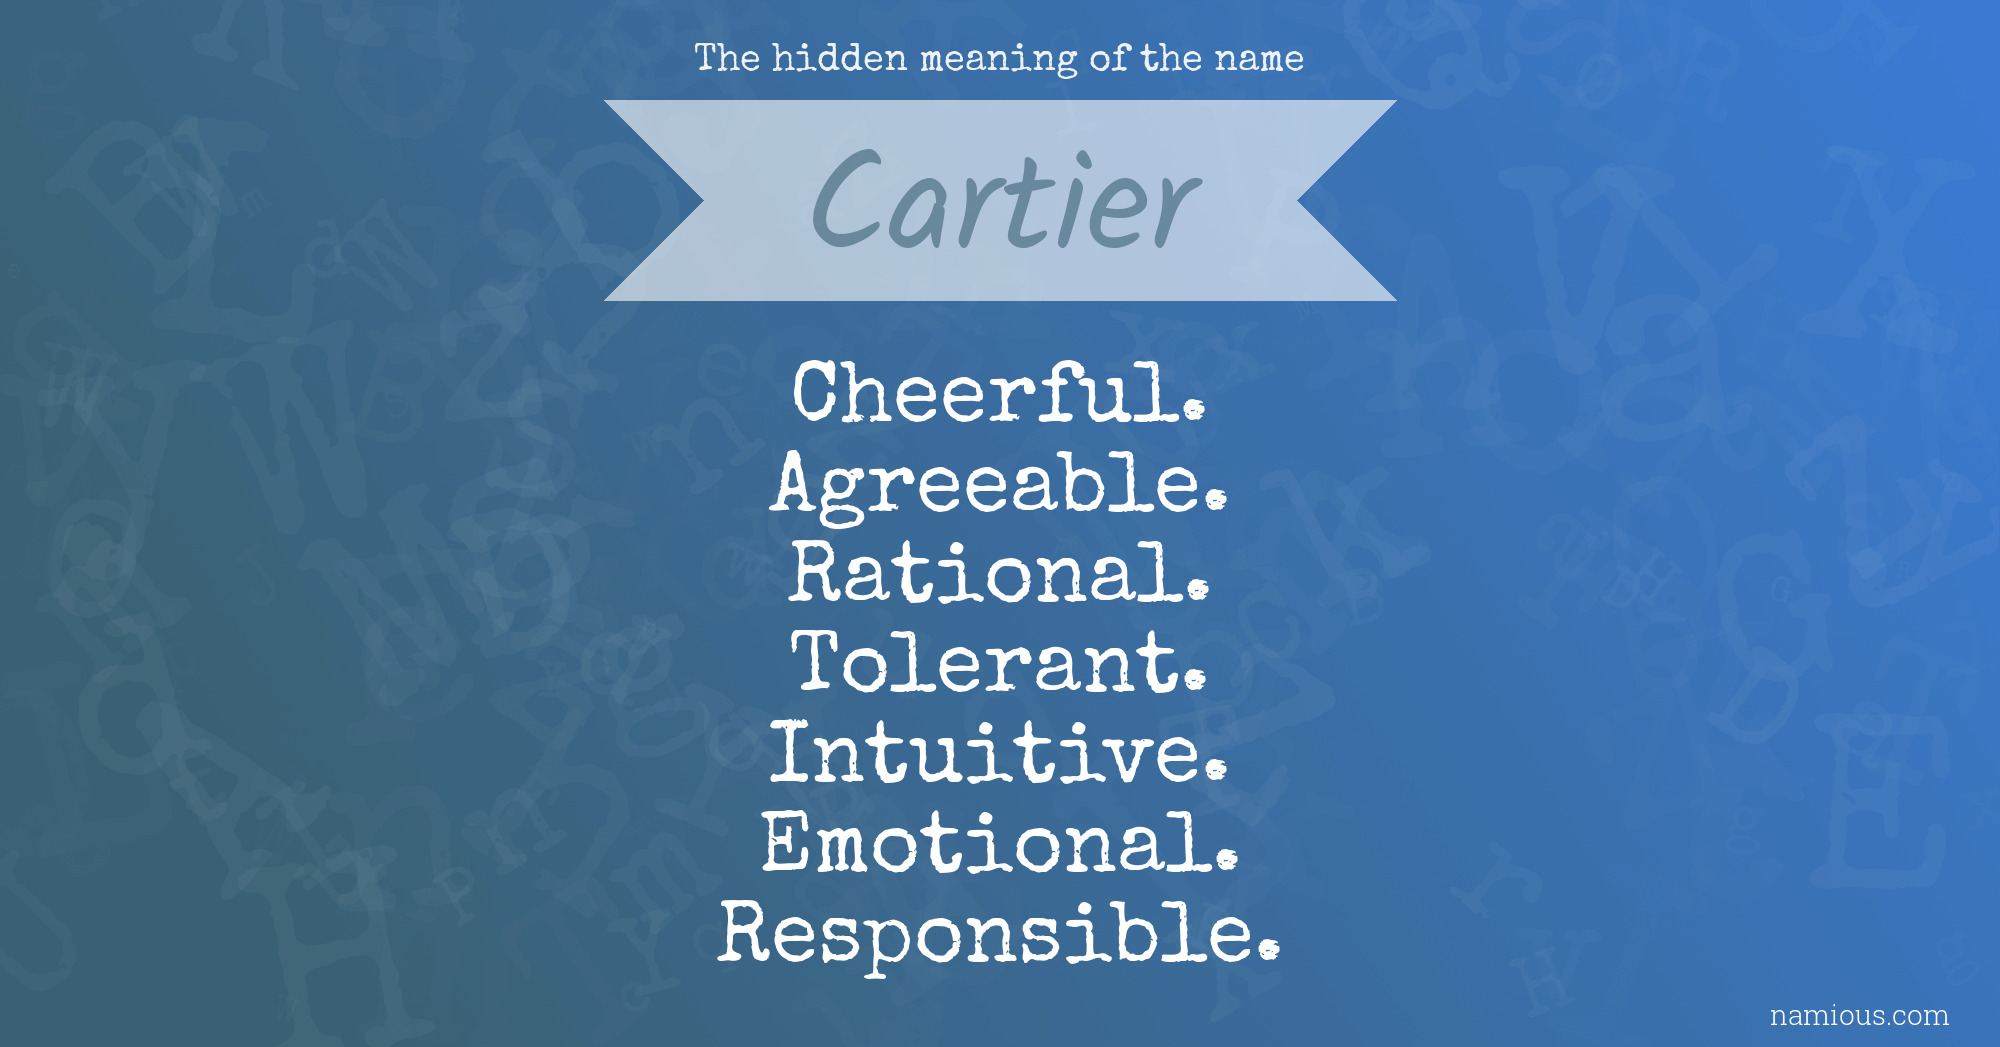 The hidden meaning of the name Cartier 